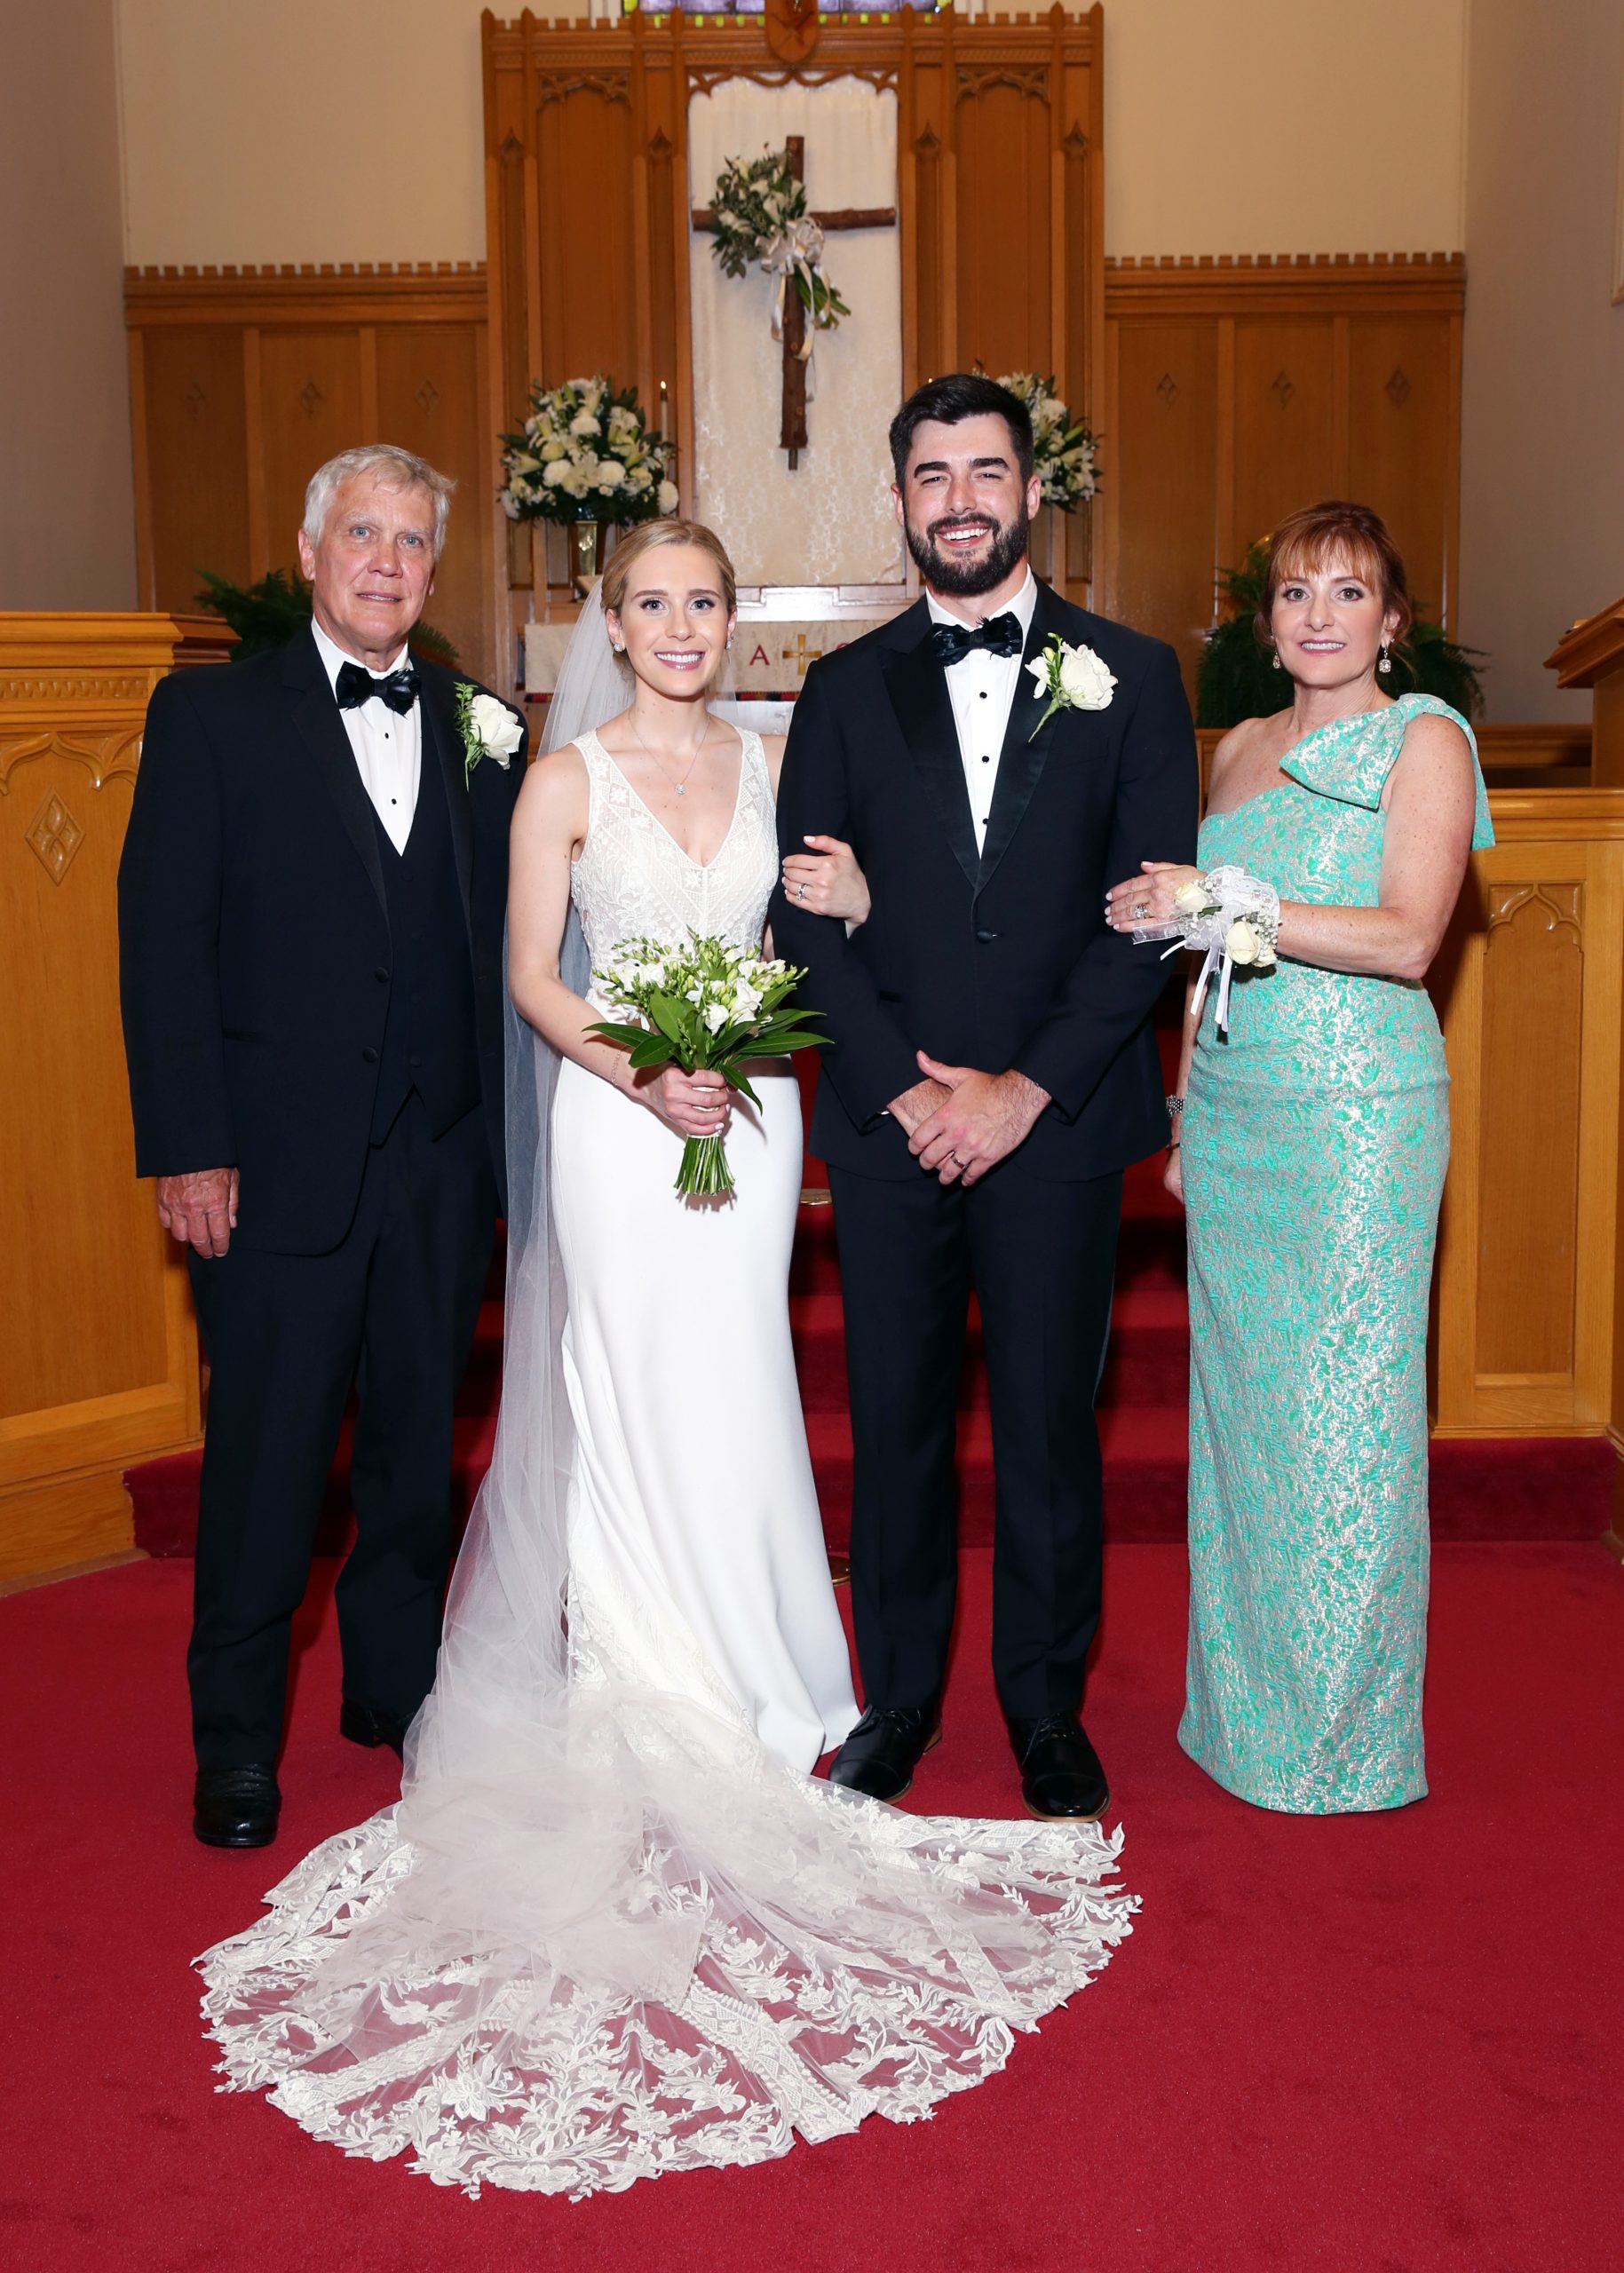 Natalie and Stanton were married at St. Peter’s Lutheran Church in Lexington. The flowers in the church were provided by Lexington Florist, including an arrangement on the altar cross in memory of Judith Parker and Leroy Rabon, Jr., Natalie’s grandparents. Father of the bride Ricky Werner, Natalie and Stanton, and mother of the bride Julie Werner.
